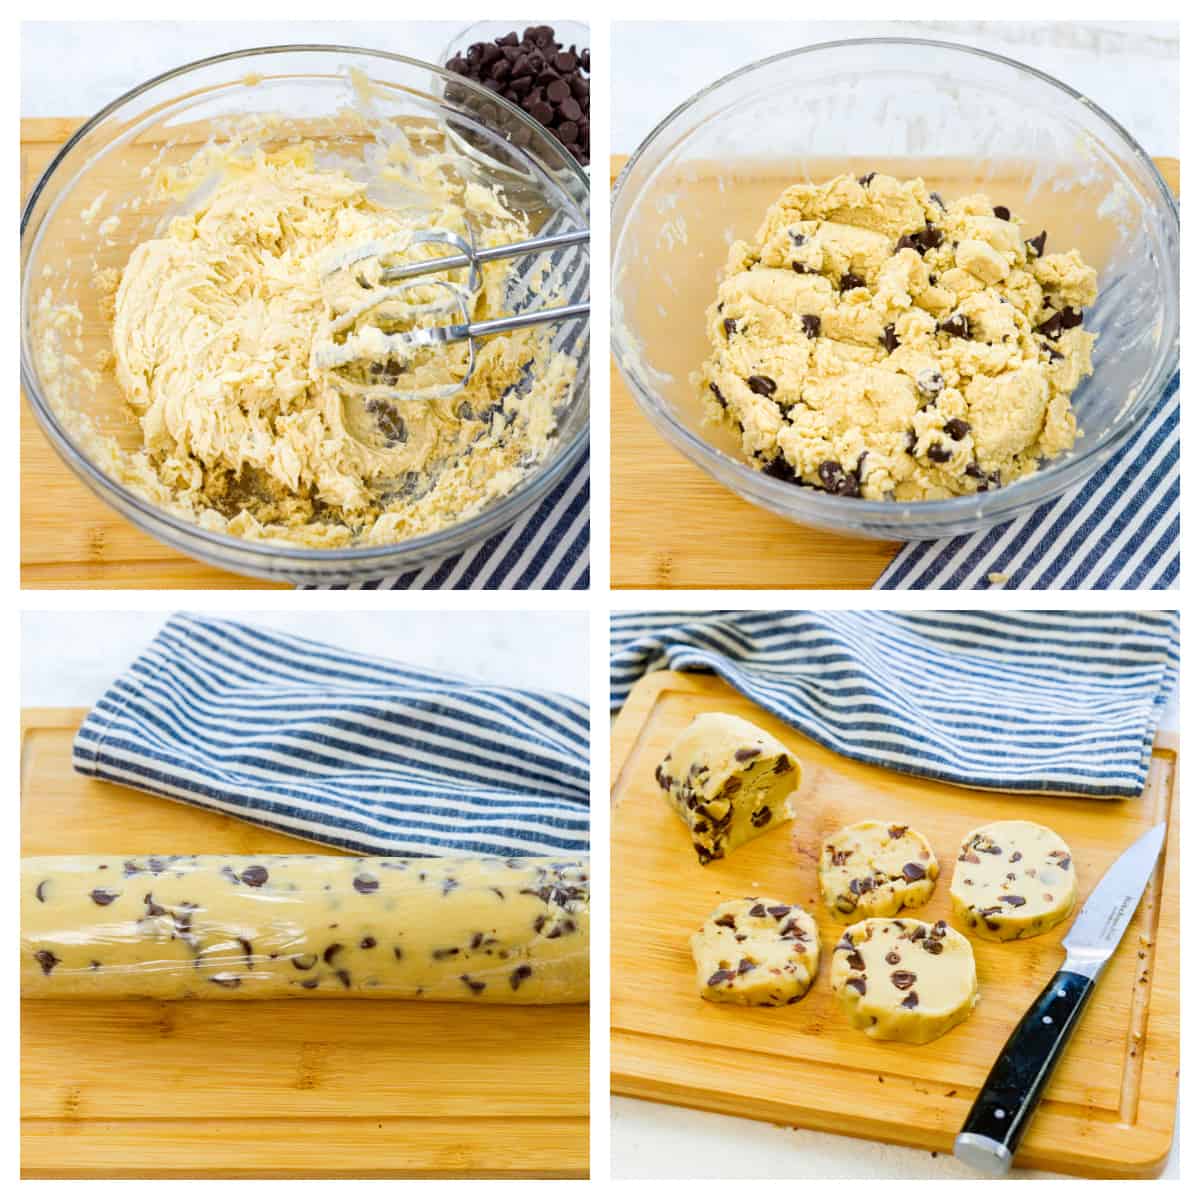 Collage showing how to make chocolate chip shortbread cookies.